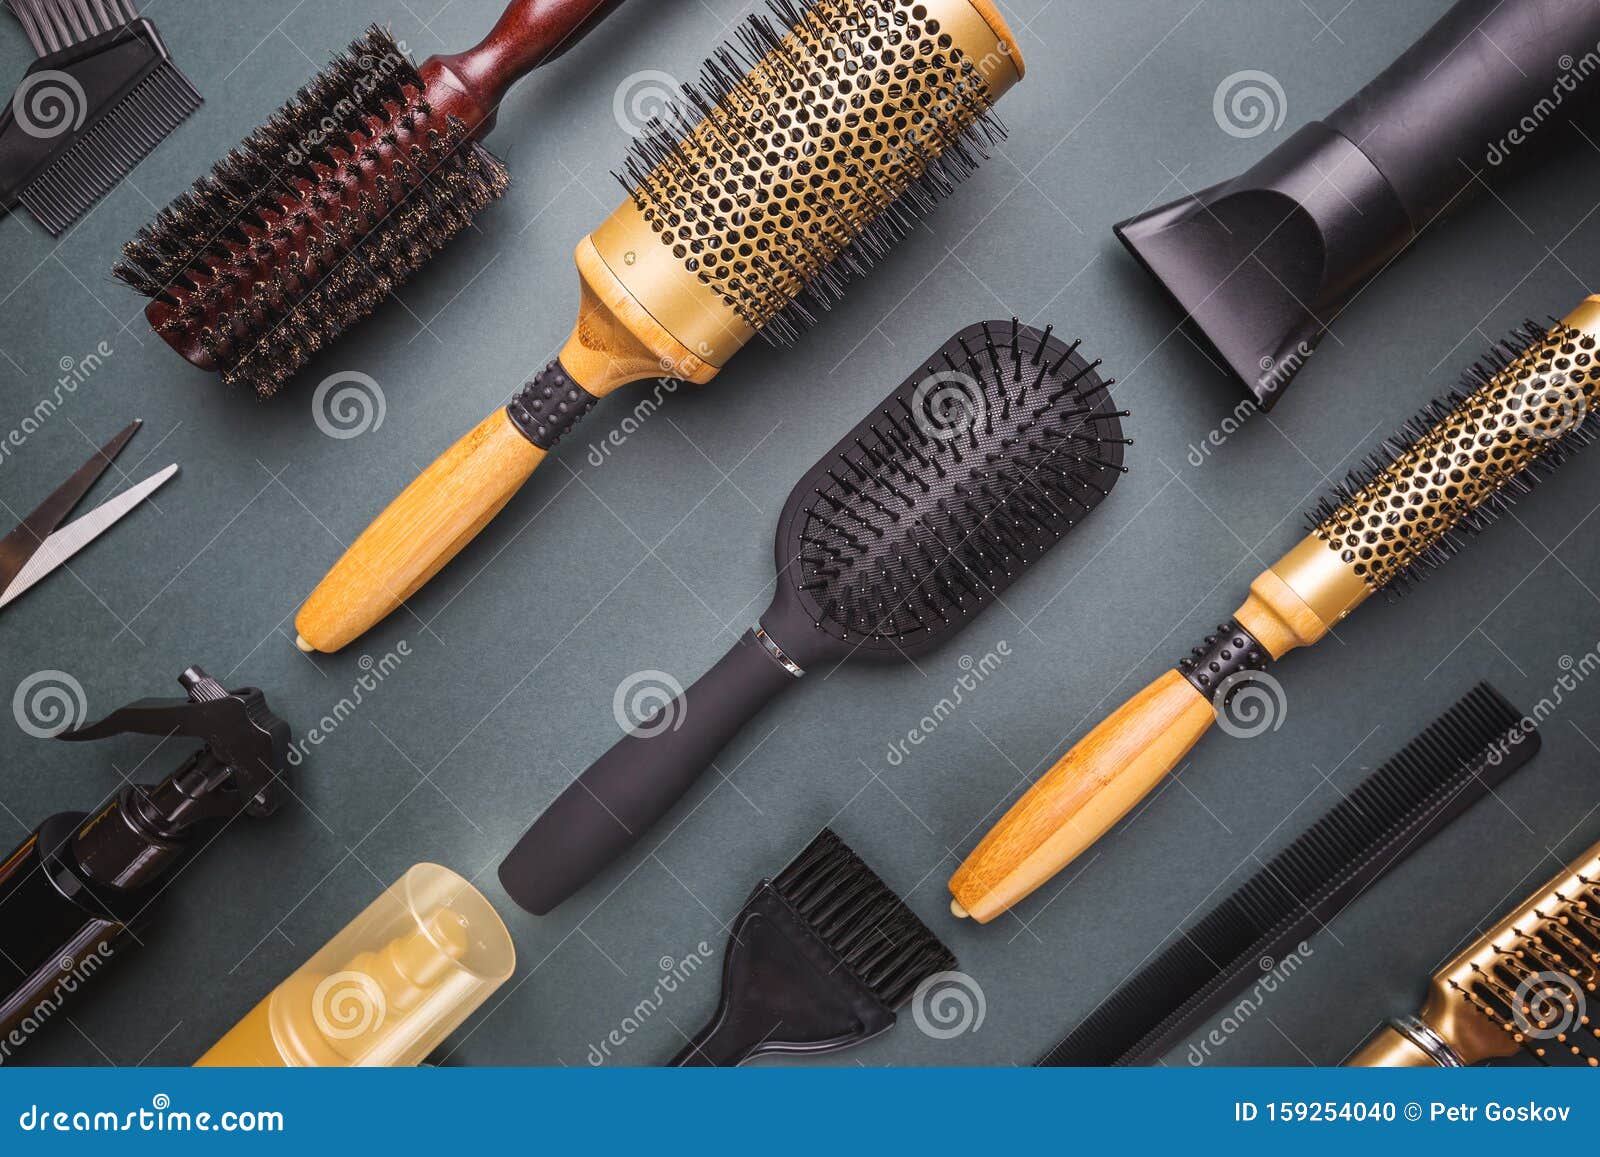 Various Hair Dresser Tools Stock Photo Image Of Care 159254040